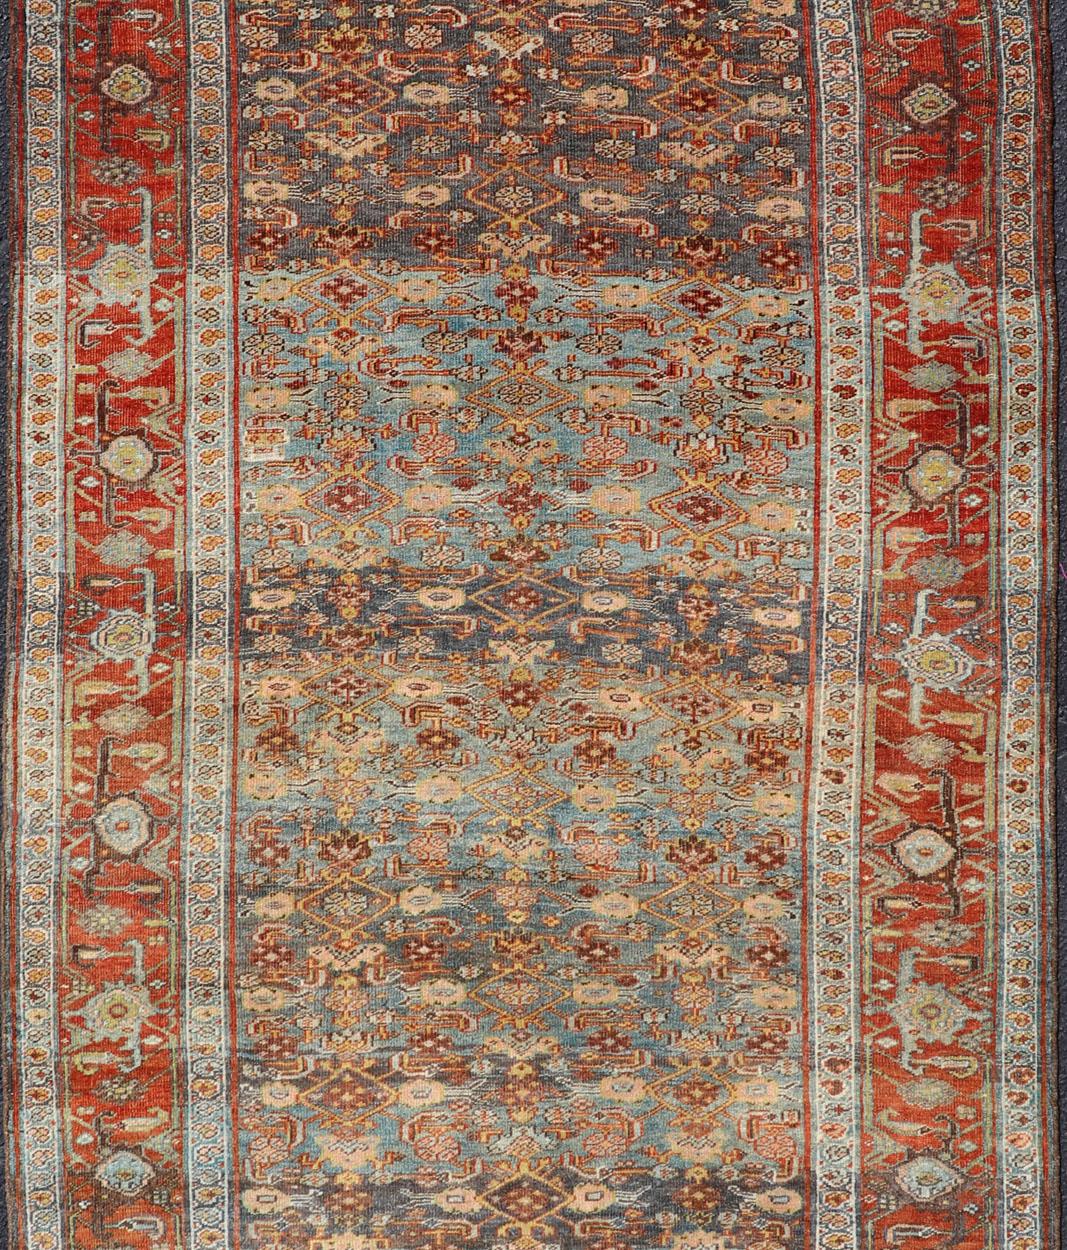 This antique hand-knotted Persian Bidjar short gallery sized rug features a all-over Sub-geometric design throughout the entirety of the piece, and is enclosed within a complementary multi-tiered border. The rug is rendered in various tones of blue,